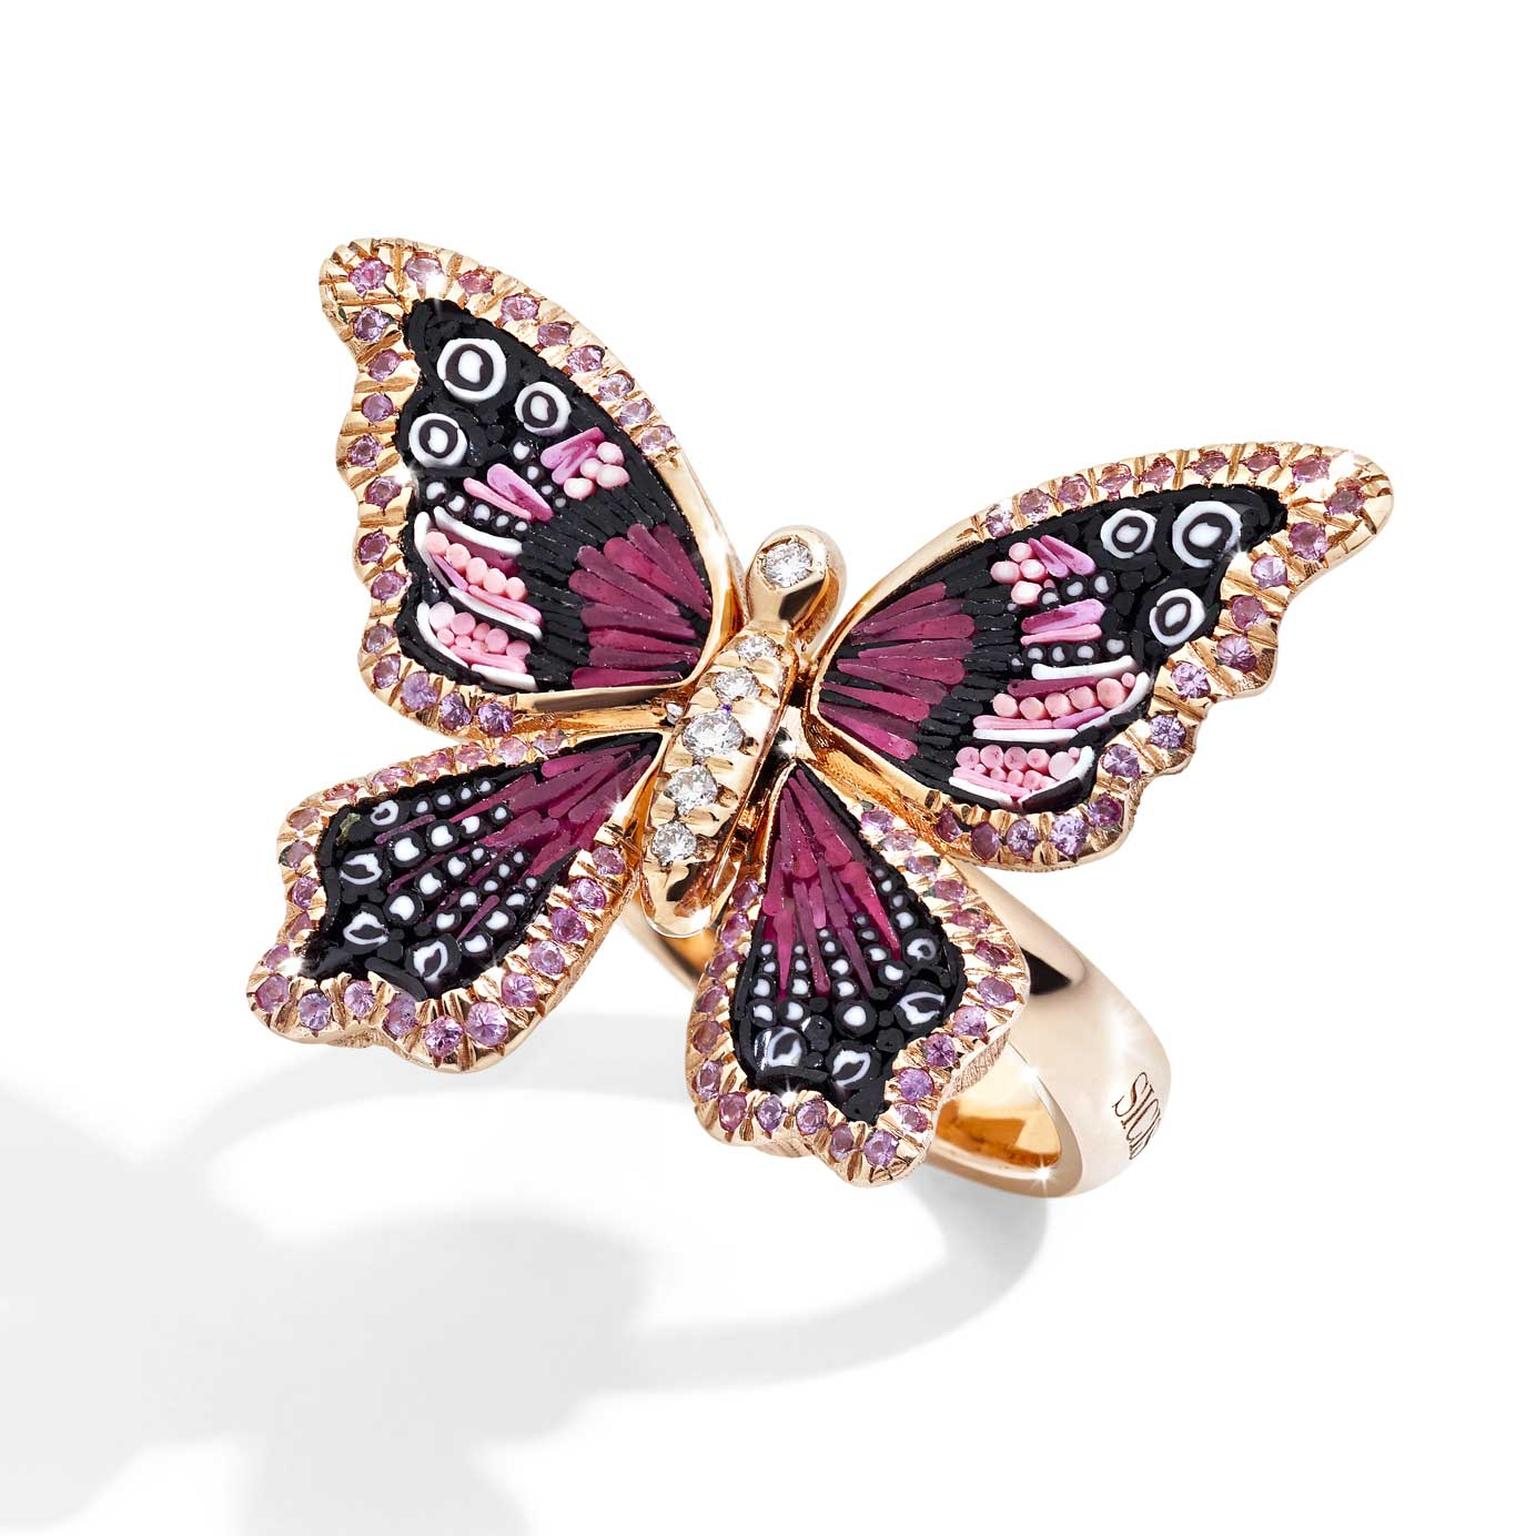 Sicis Nymphalia Pearly Eye butterfly ring